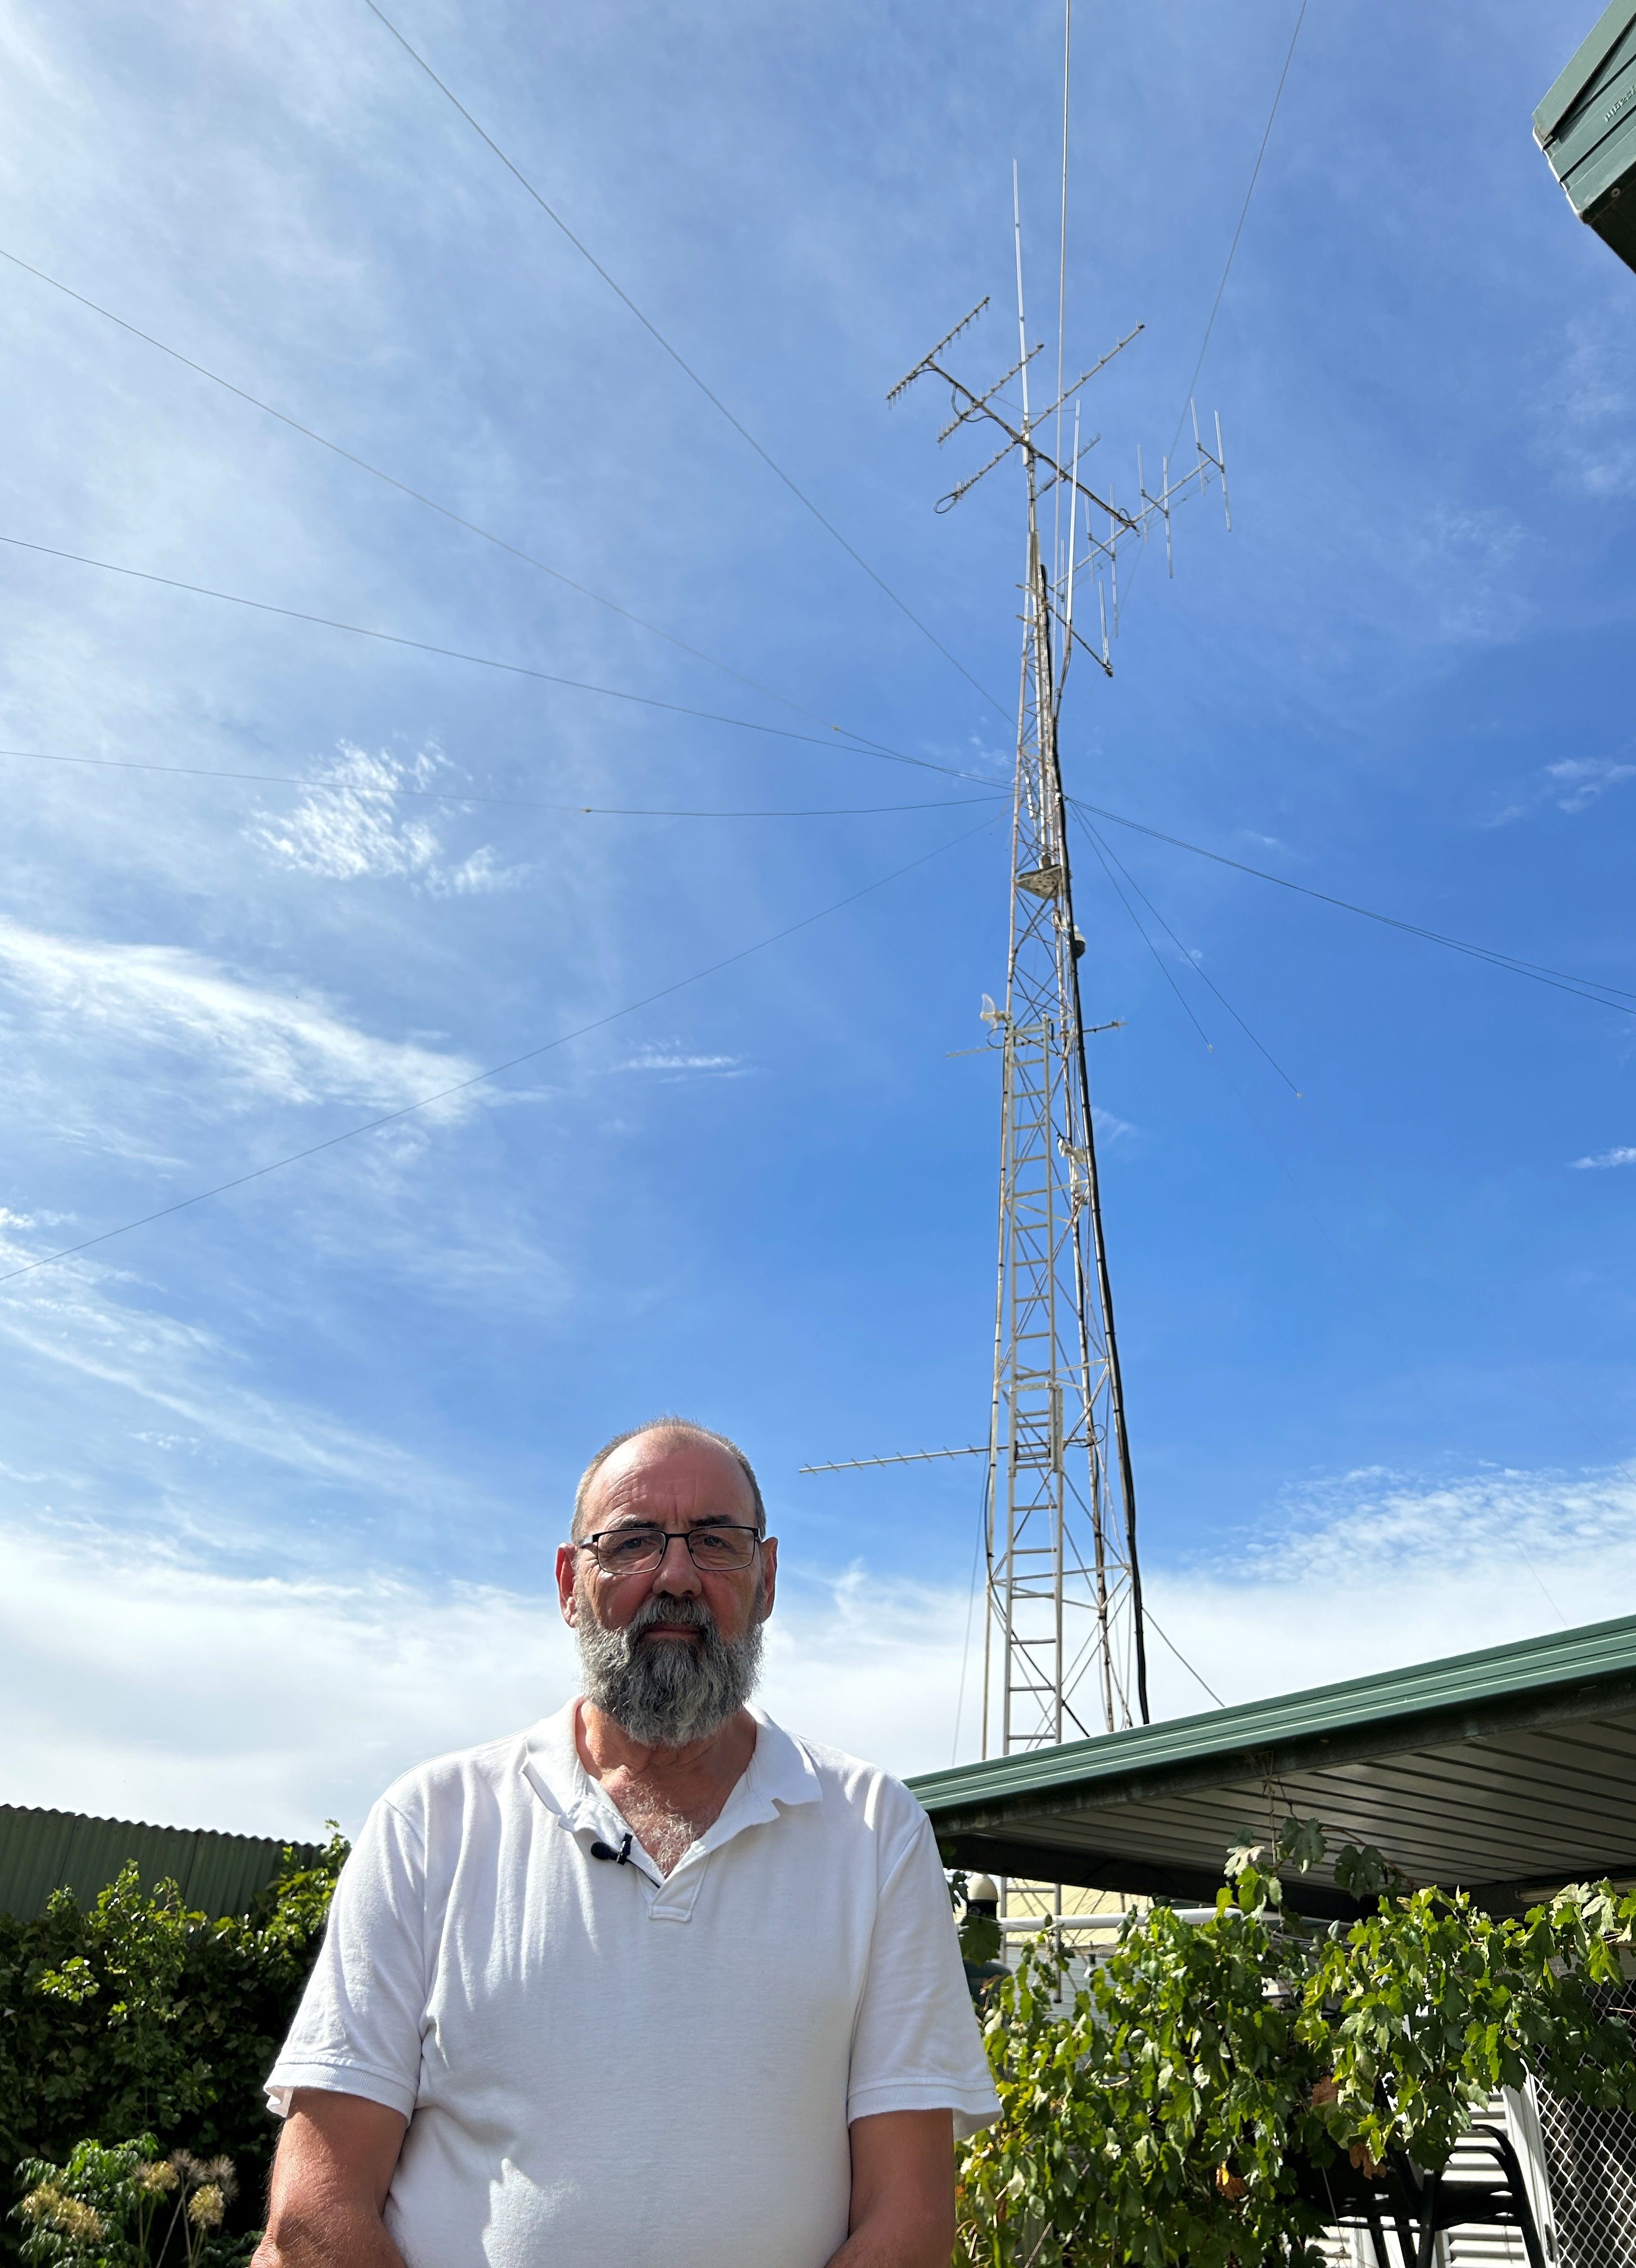 A bearded man outdoors in a white shirt beneath a slender TV tower.